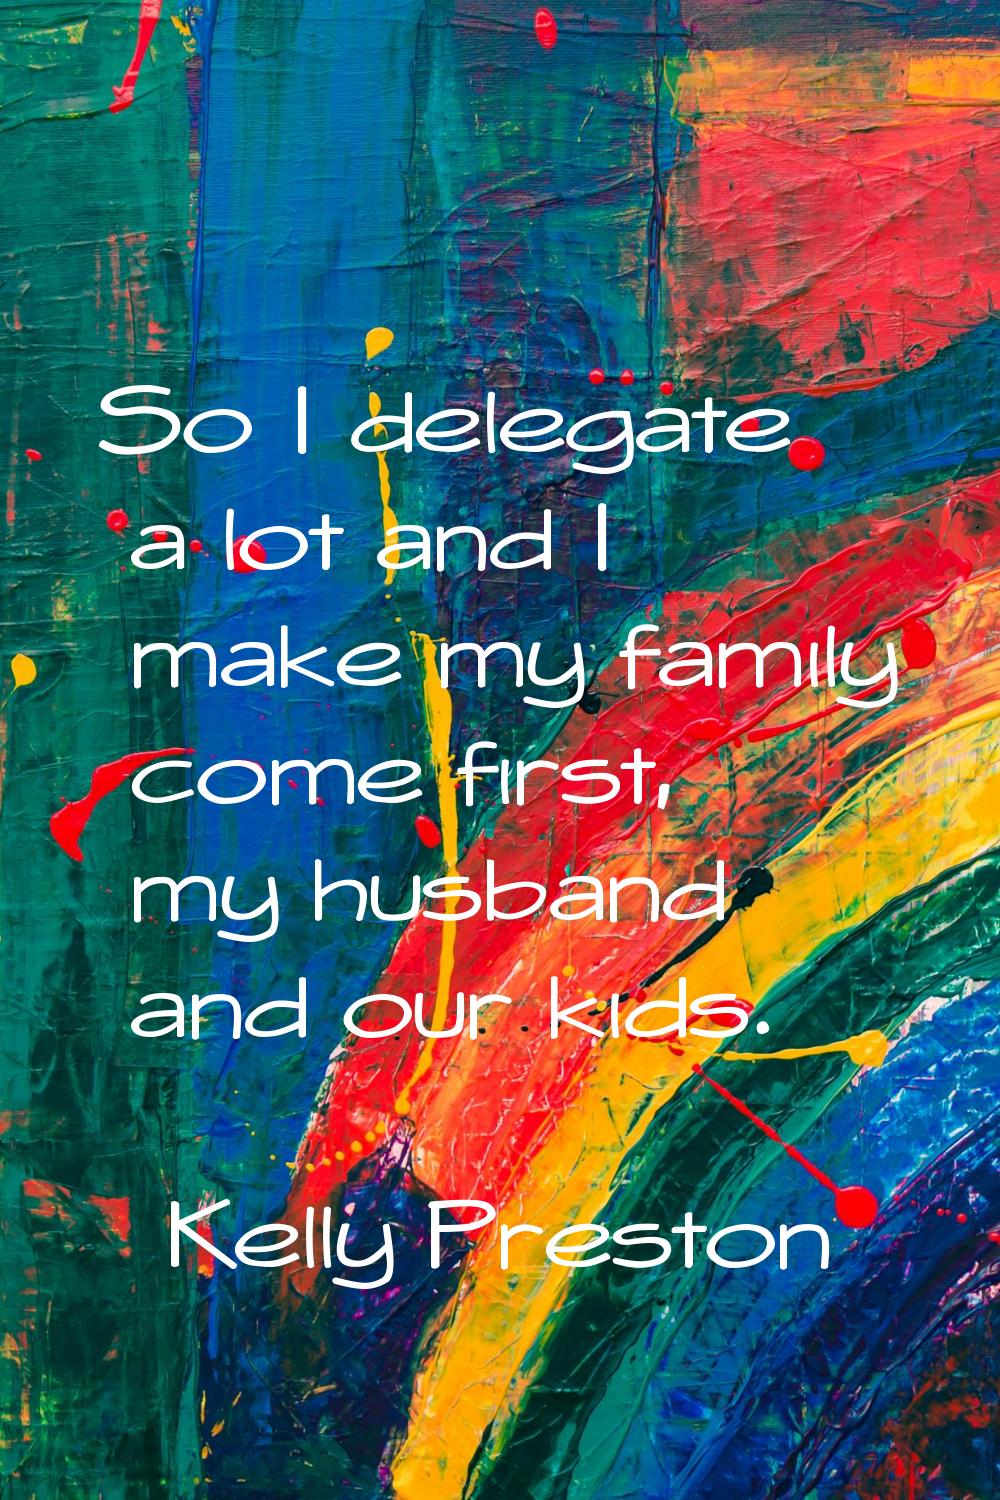 So I delegate a lot and I make my family come first, my husband and our kids.